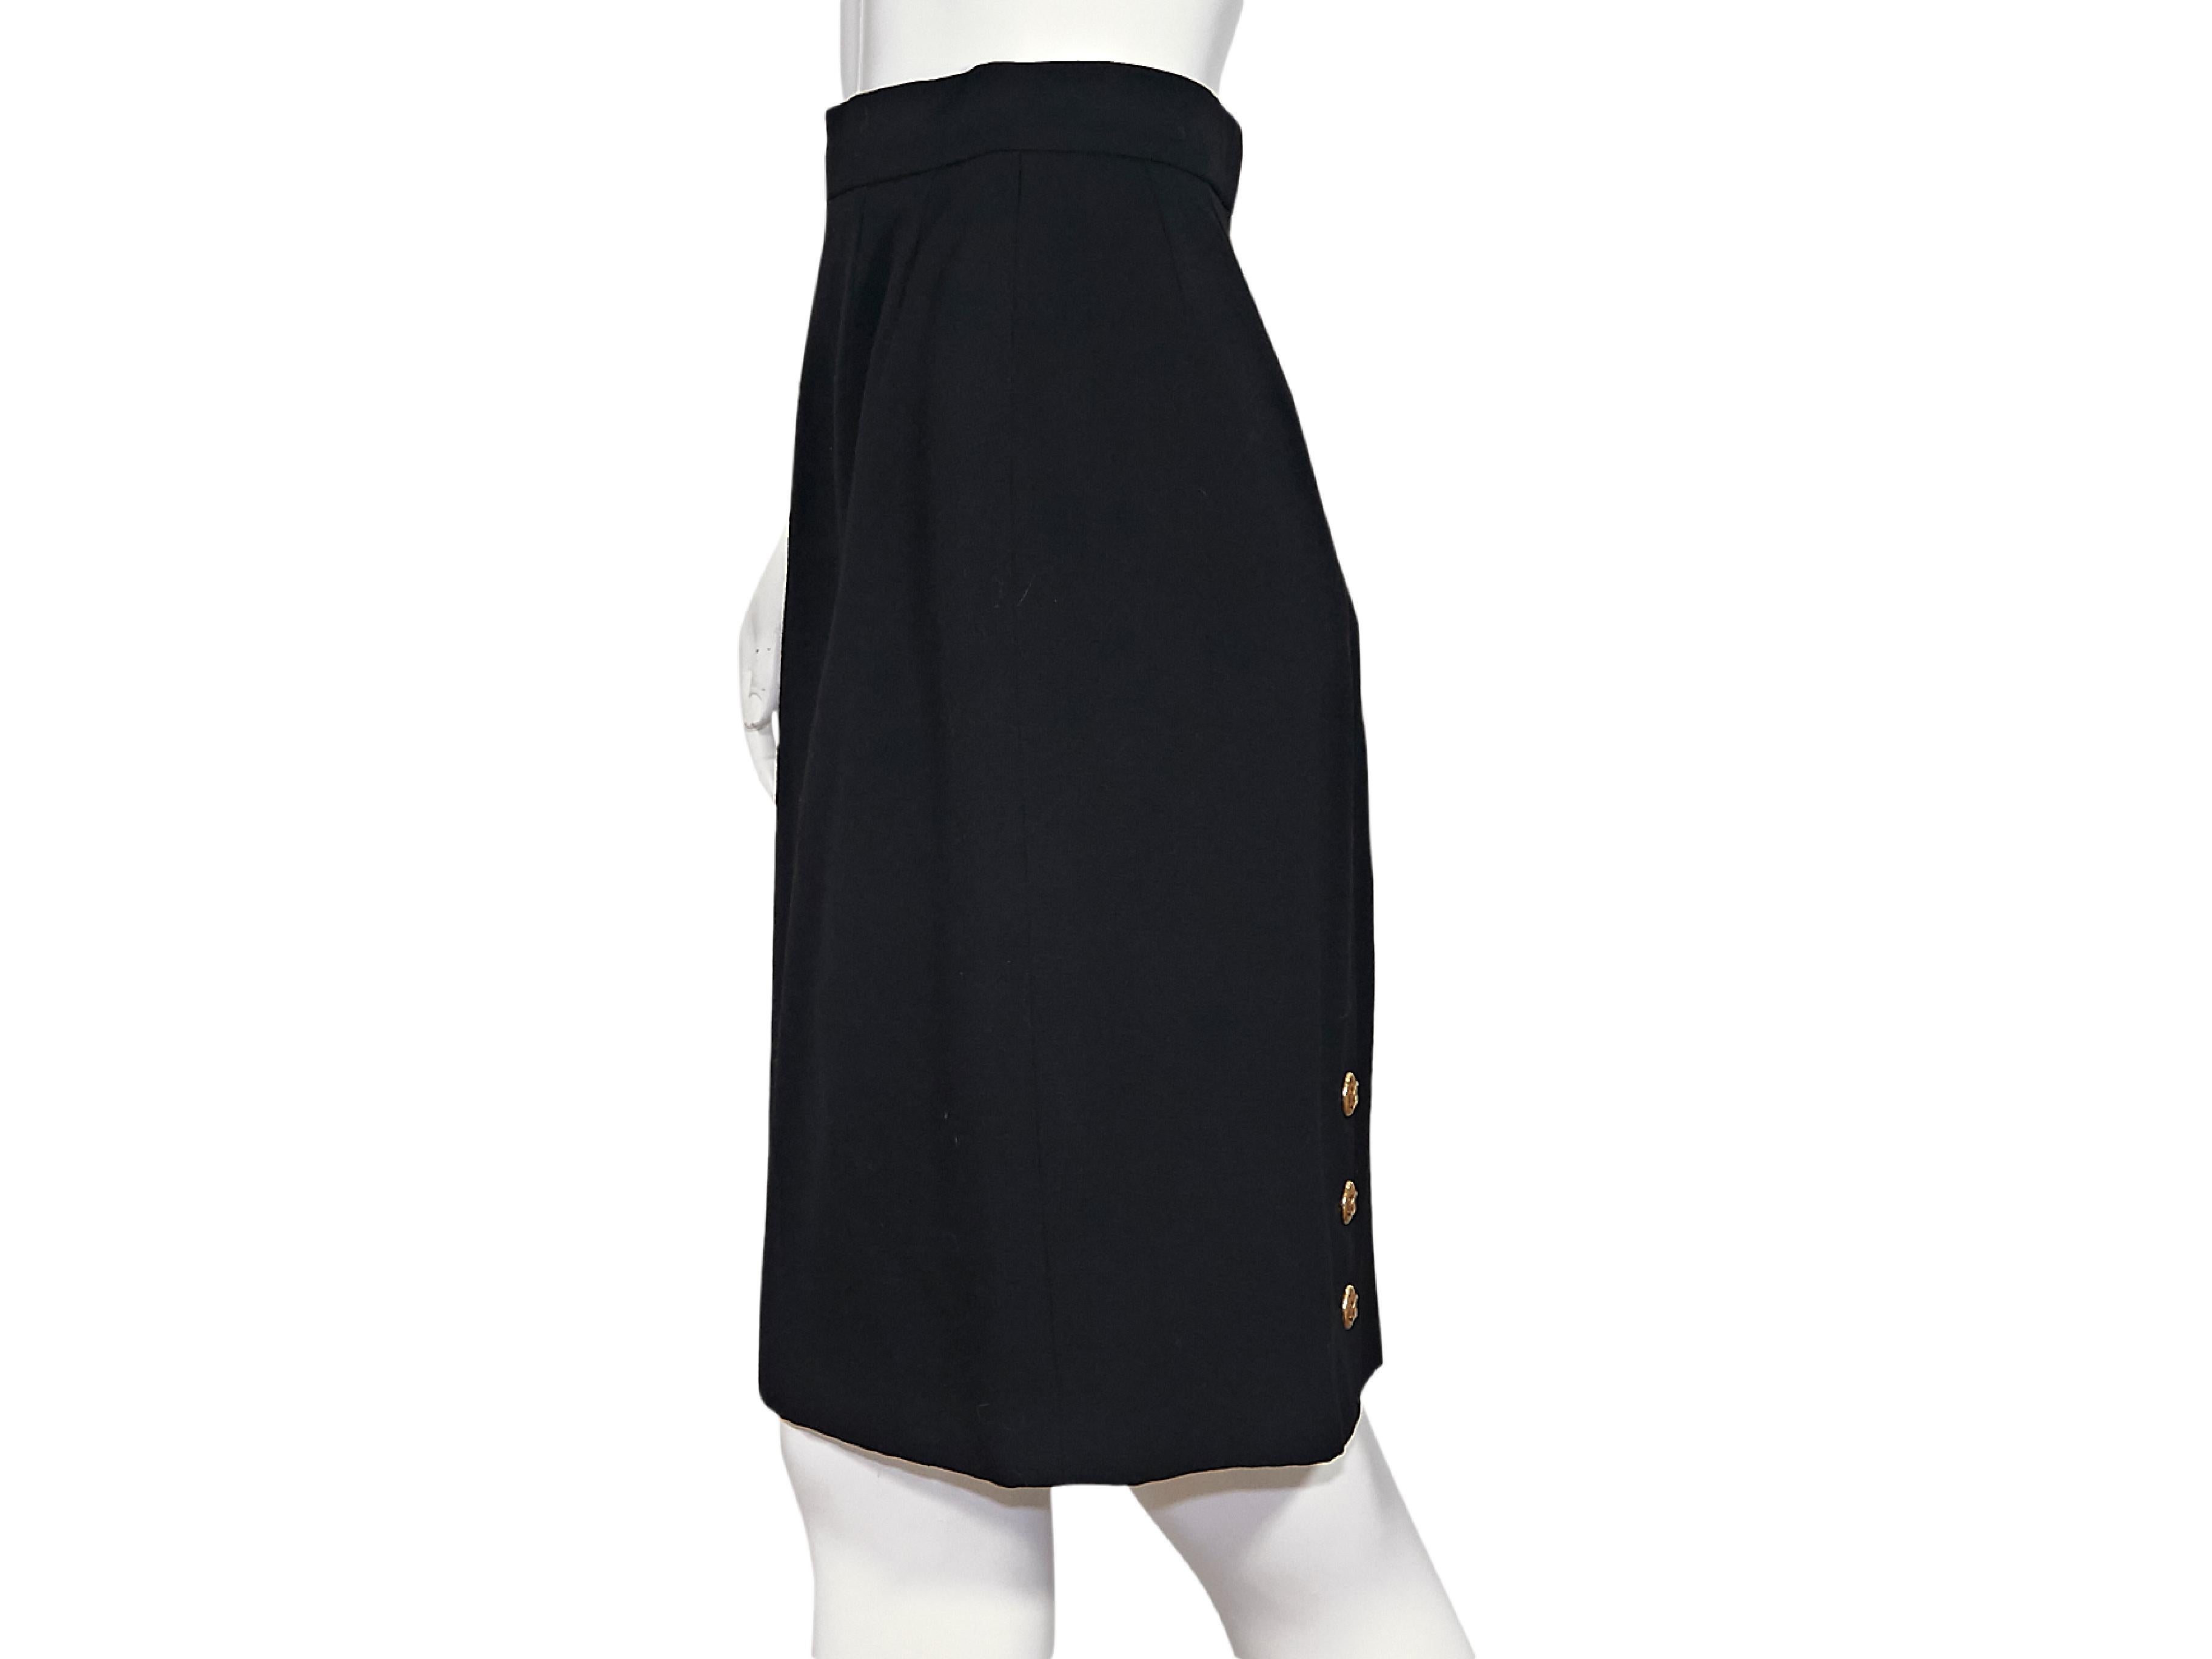 Product details:  Vintage black wool pencil skirt by Chanel.  Banded waist.  Concealed back zip and hook closure.  Back center hem with three-button detail.  Goldtone hardware.  27